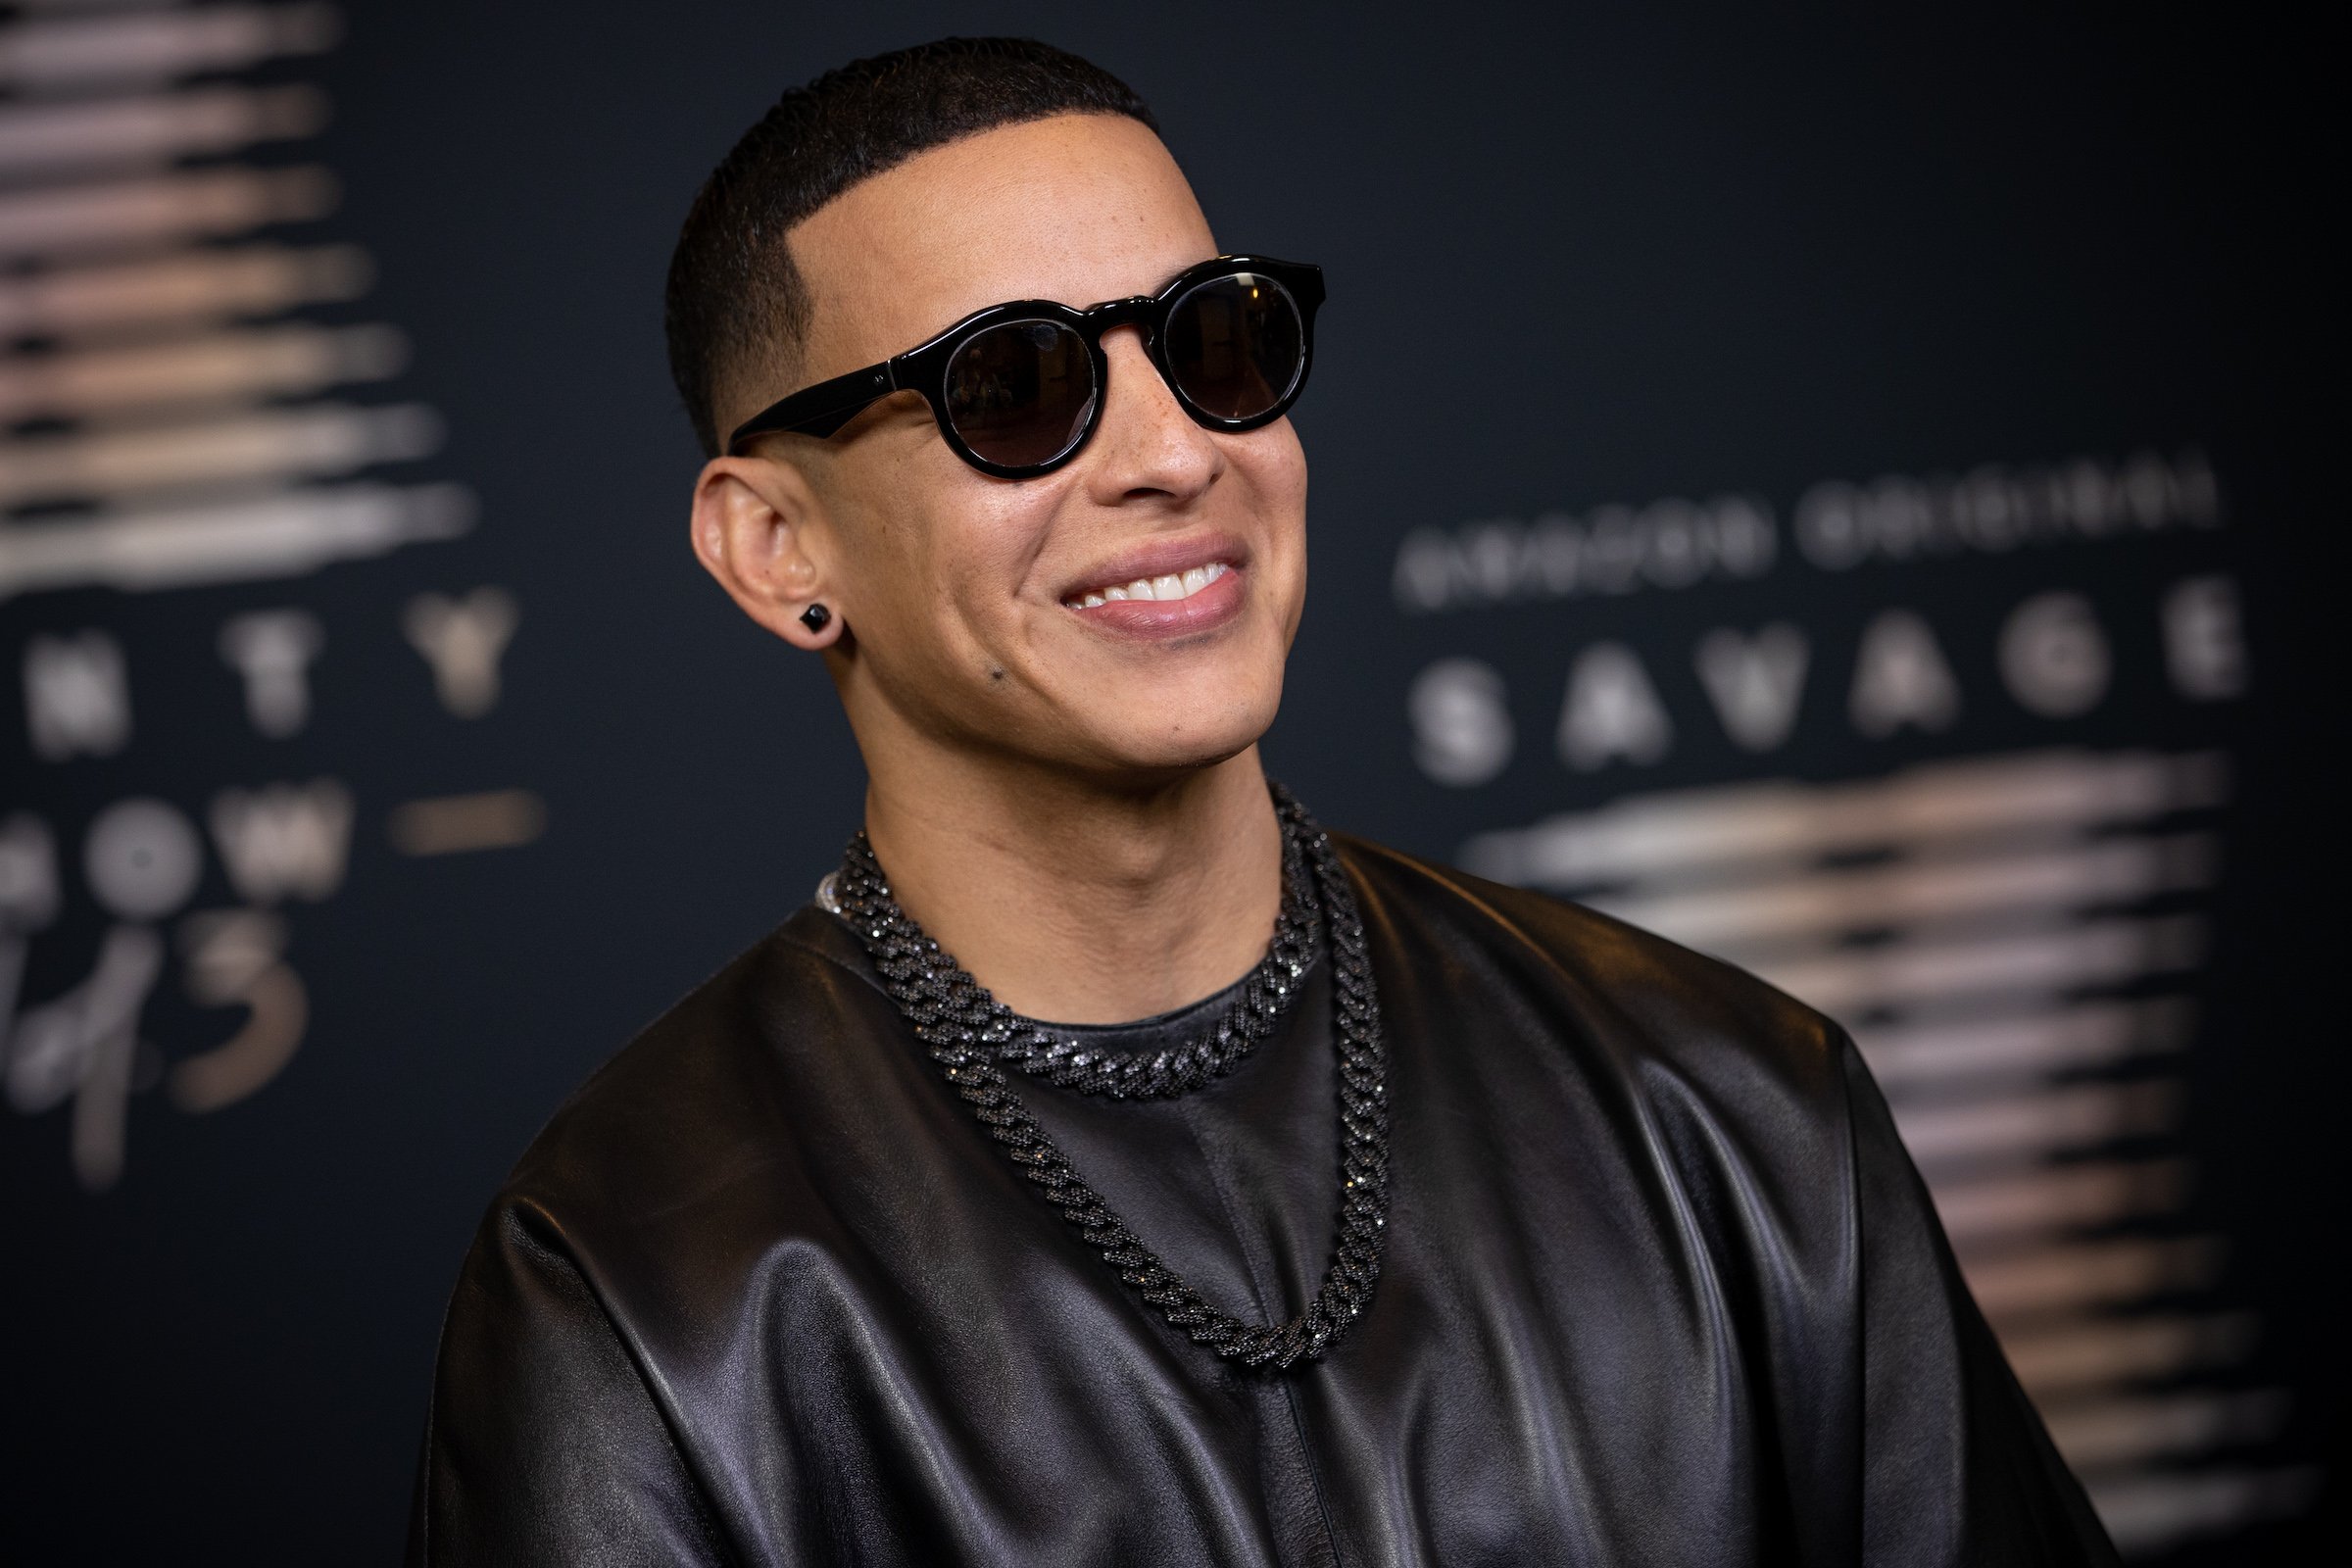 Daddy Yankee wearing sunglasses and black leather